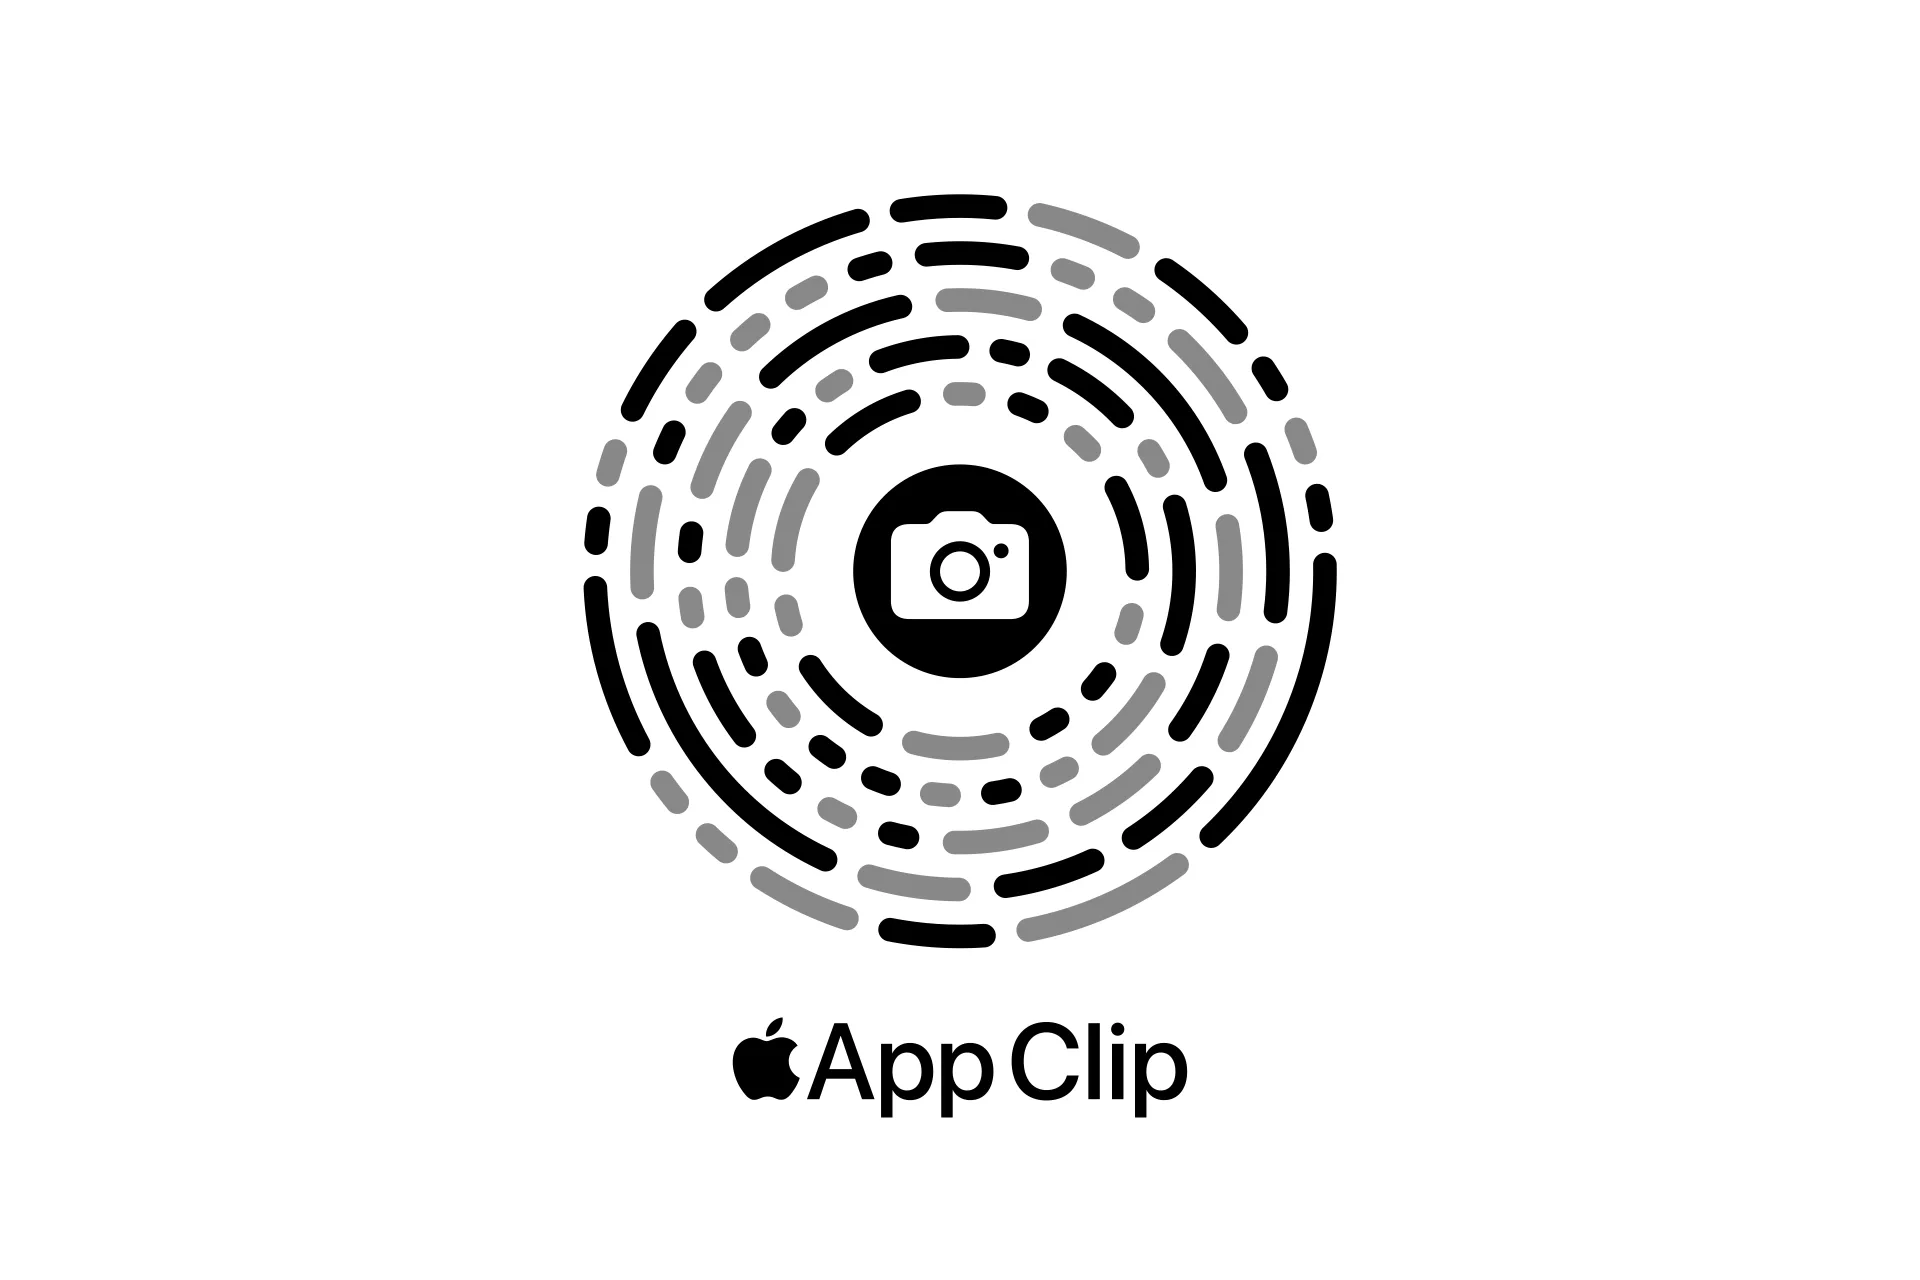 An Apple App Clip QR Code that allows you to try out the Sans Hands experience without downloading it from the Apple Store.